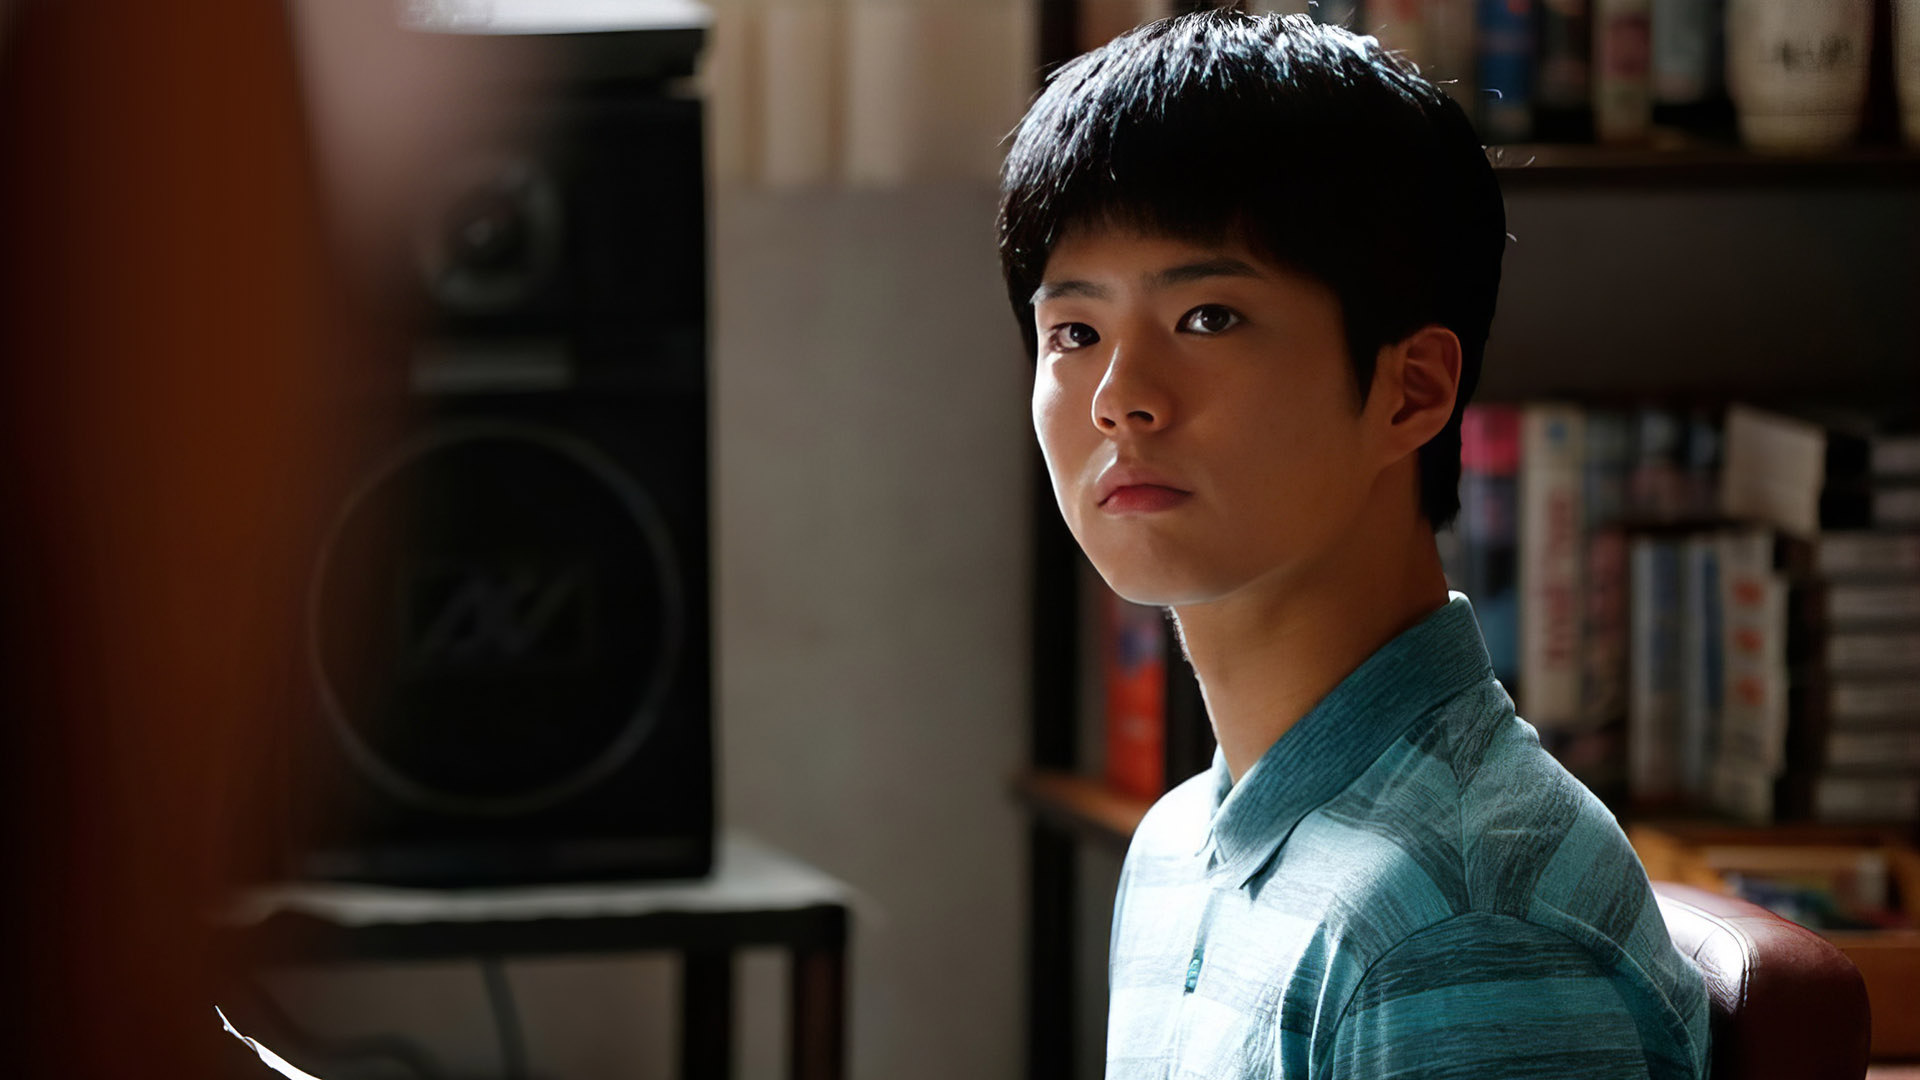 7 Wholesome Korean Dramas to Watch If You Loved Reply 1988